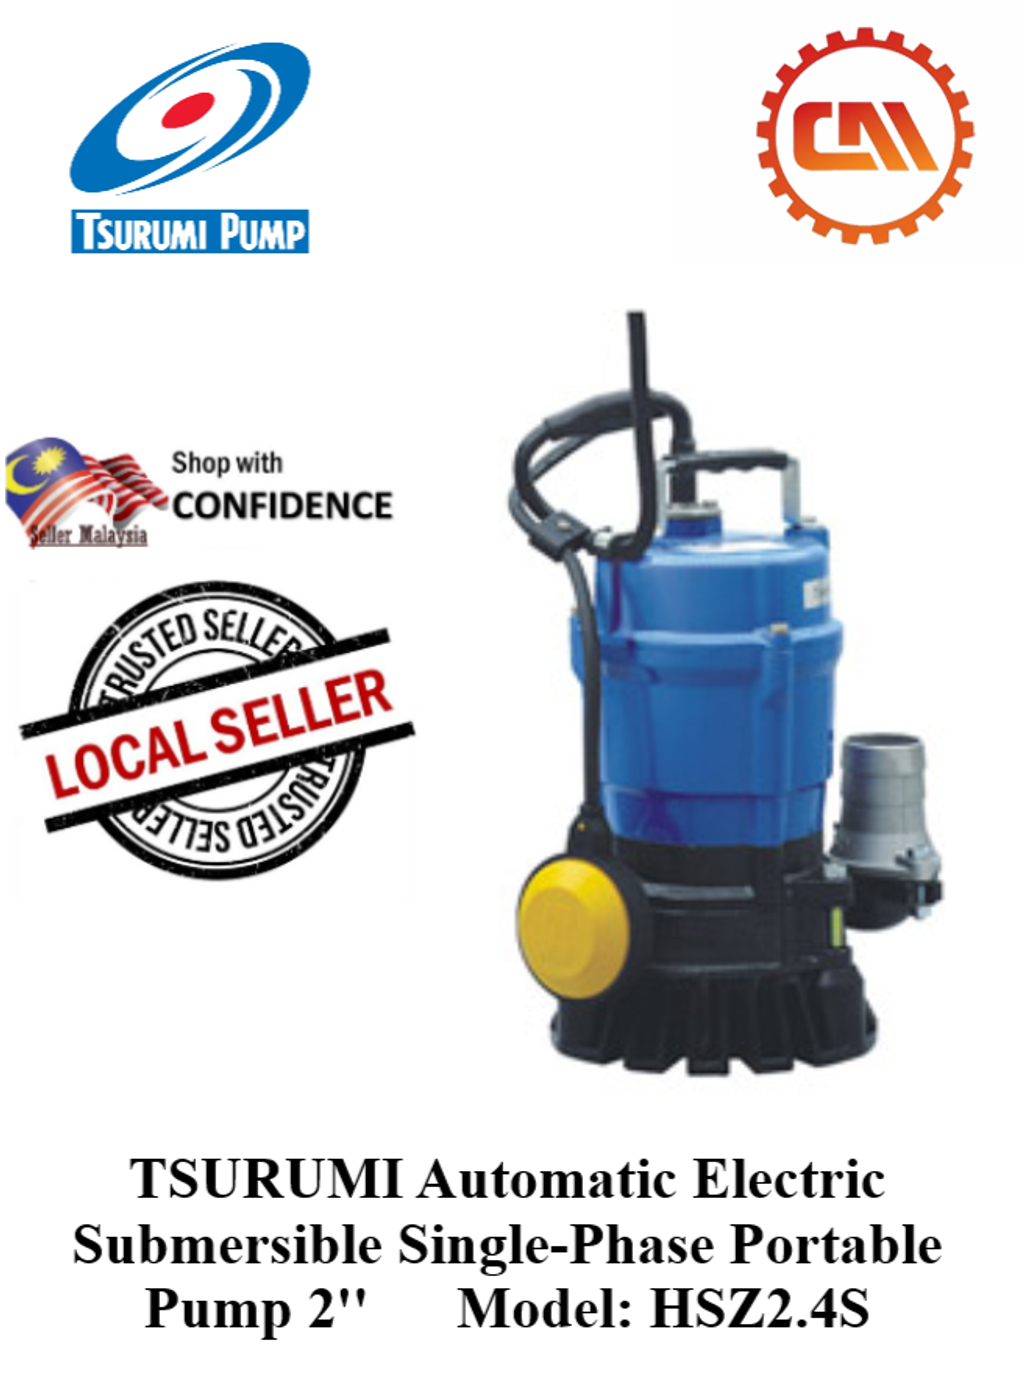 TSURUMI Automatic Electric Submersible Single-Phase Portable Pump 2''  (Model: HSZ2.4S) – Conmax Resources